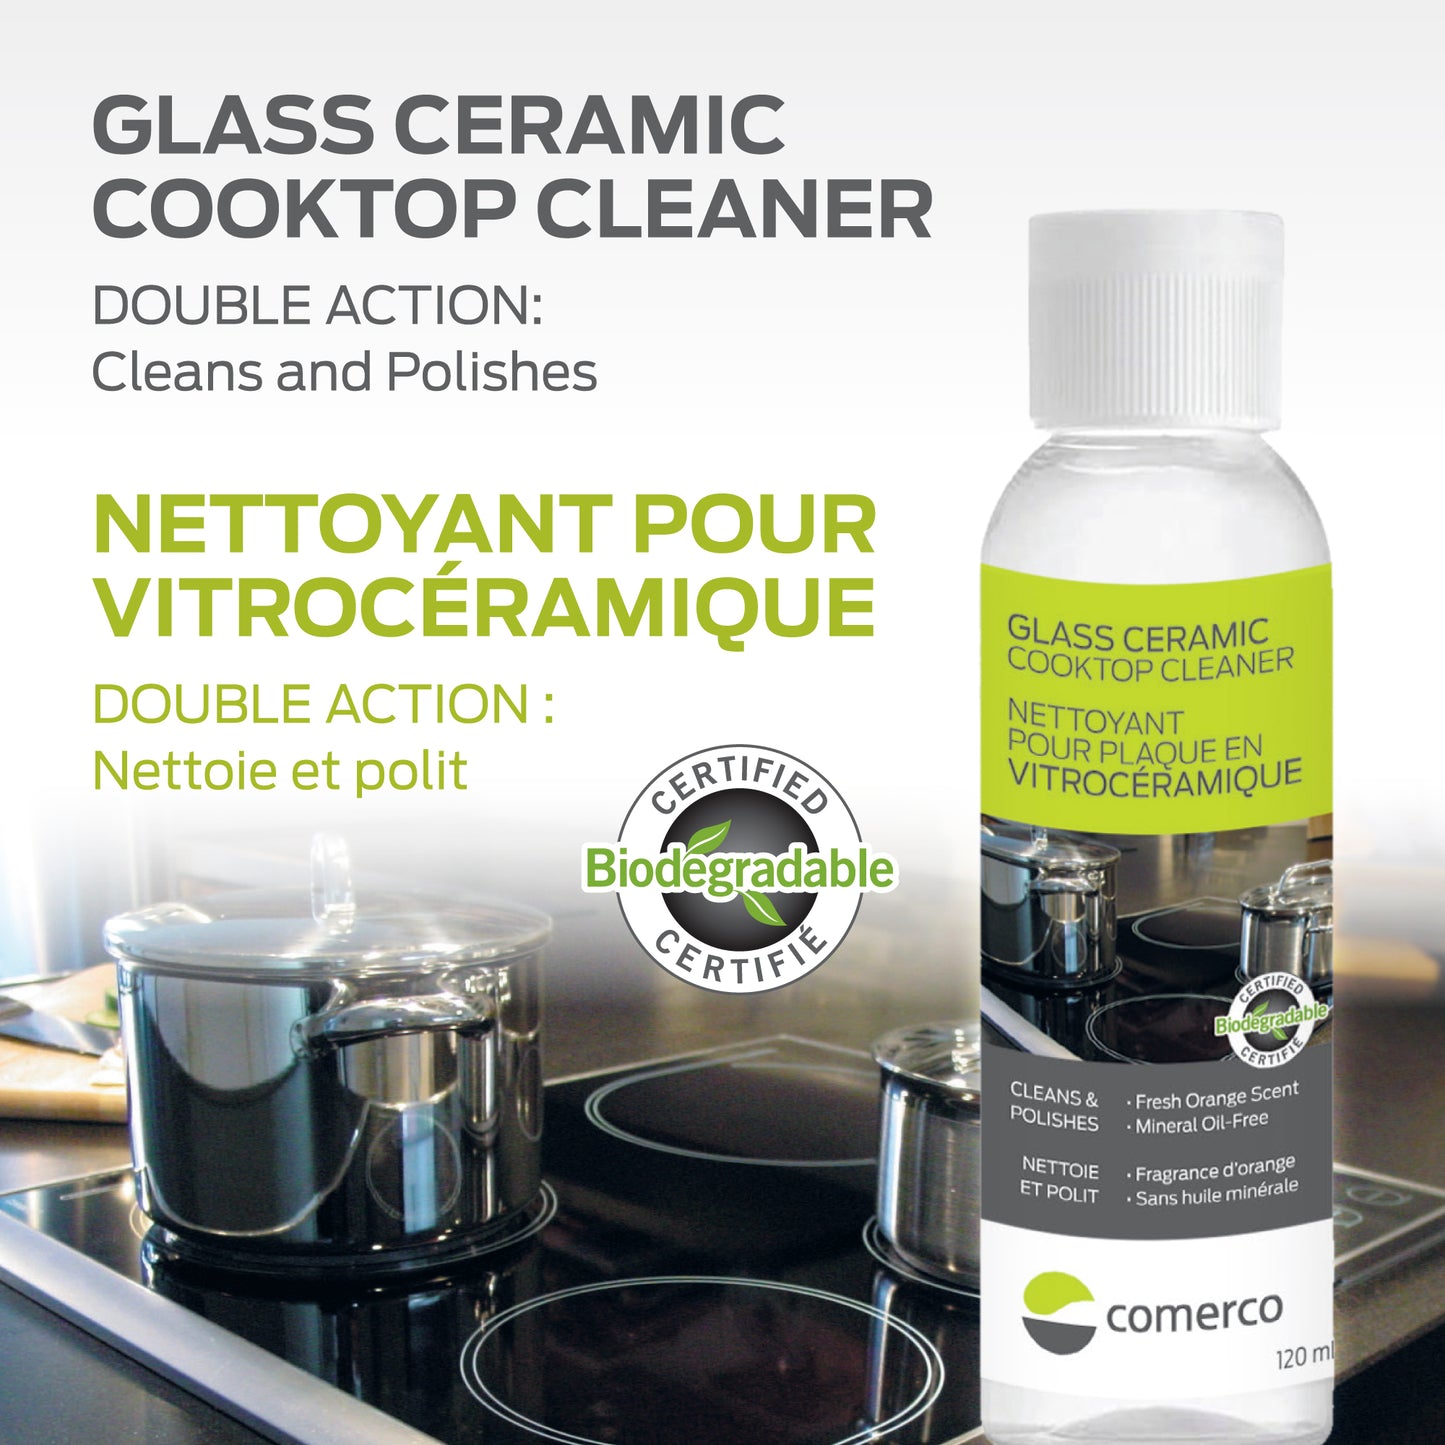 ECO+ Appliance Sample Care Kit - 5 Eco-Friendly Products